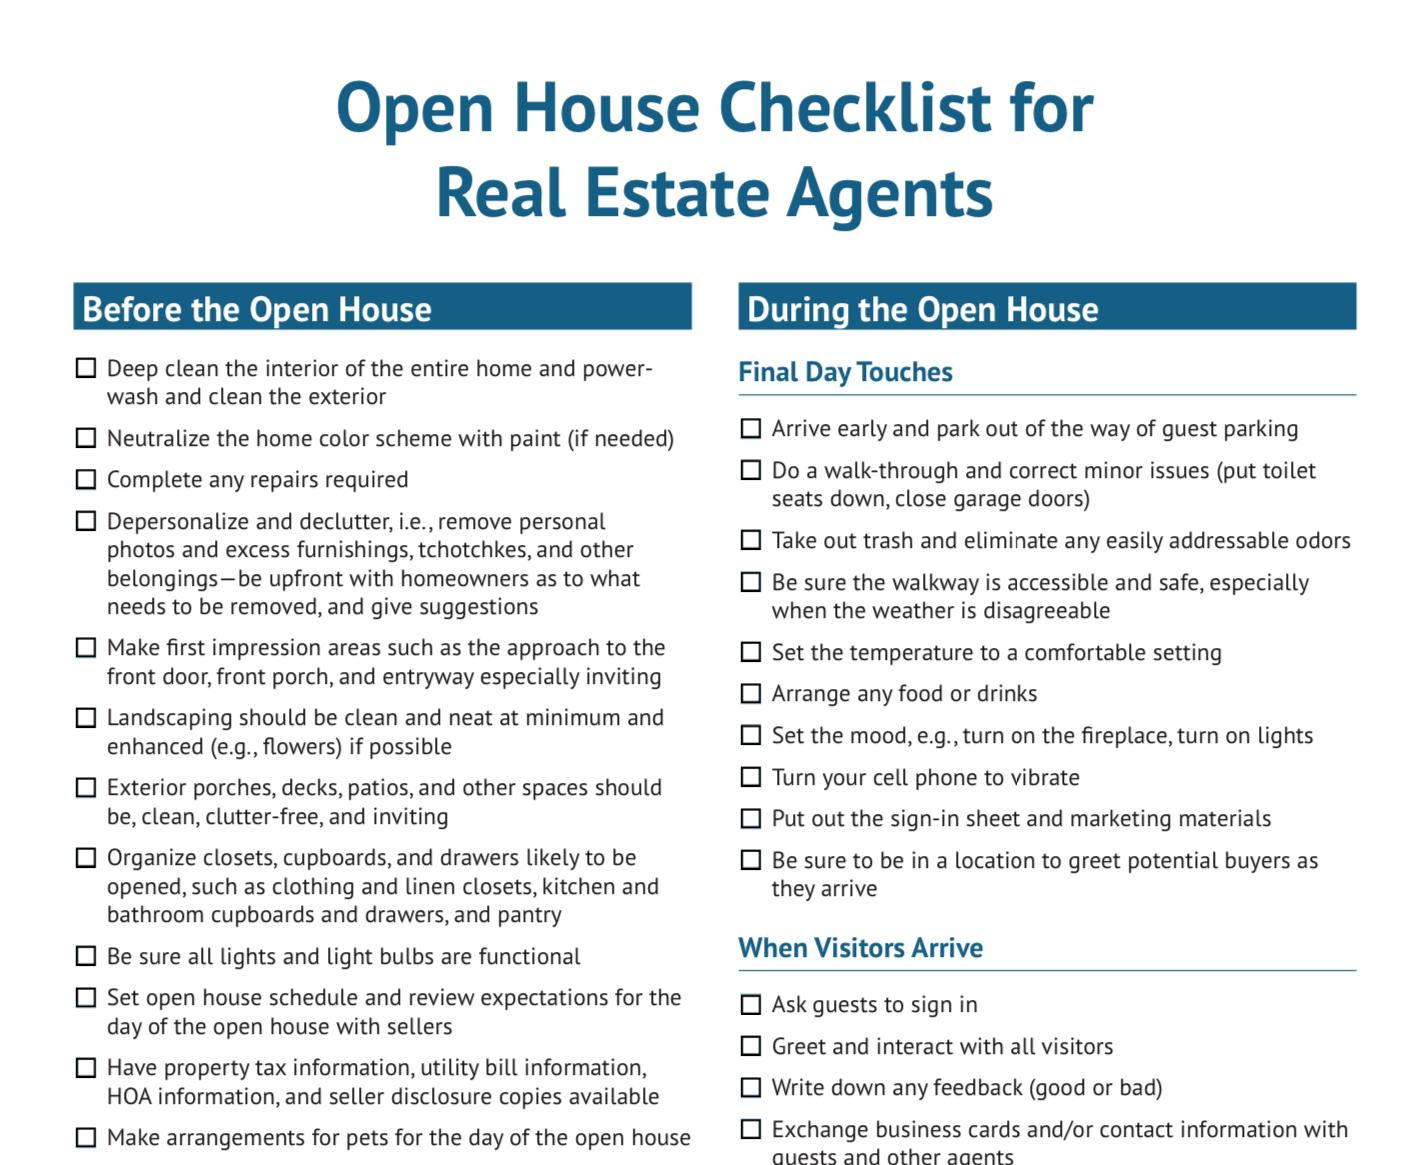 Screenshot of an open house checklist for real estate agents.